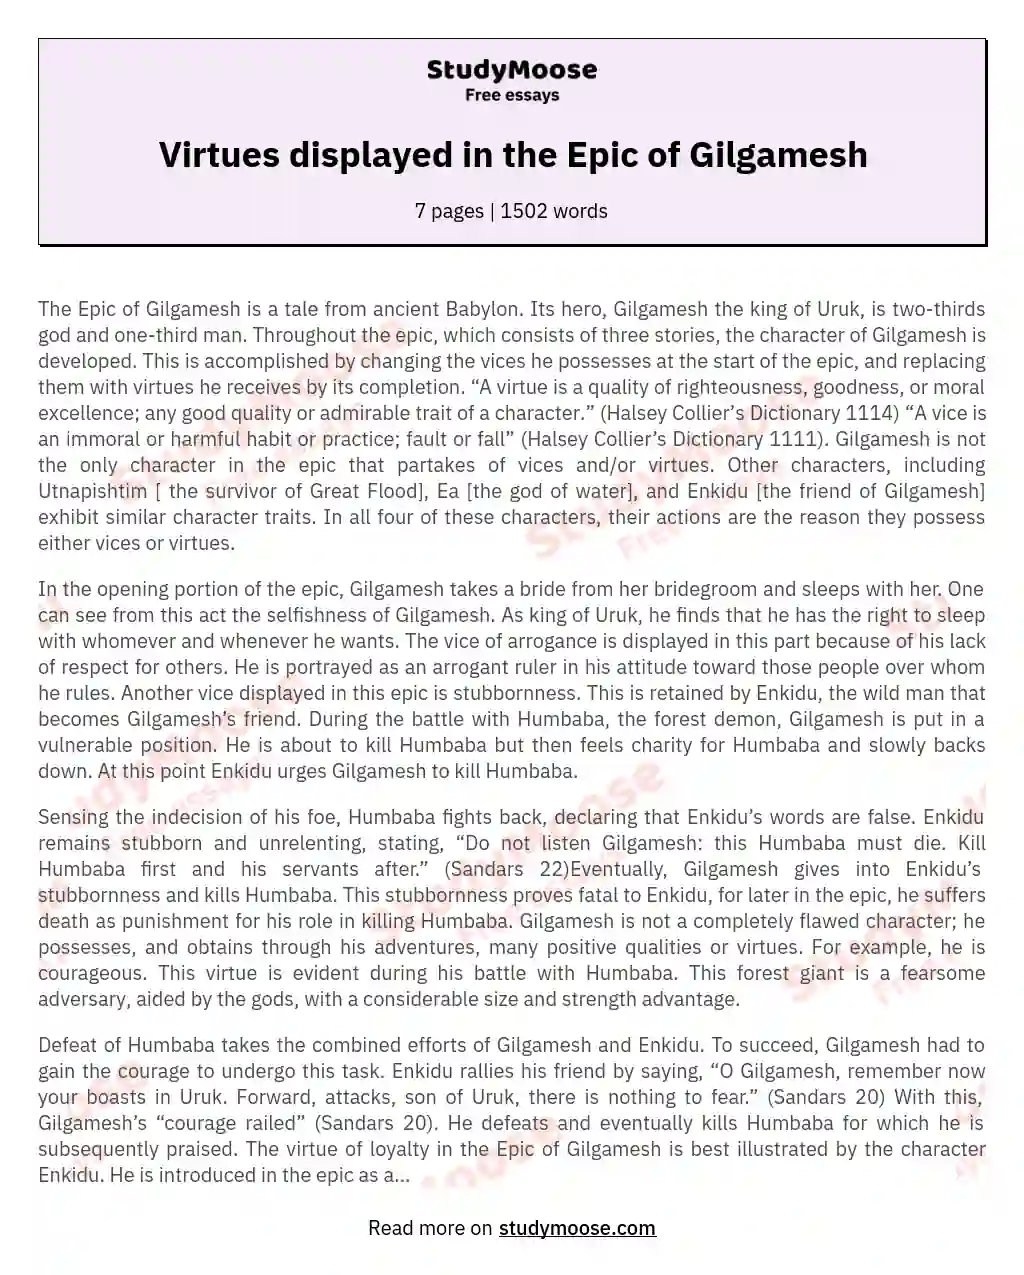 Virtues displayed in the Epic of Gilgamesh